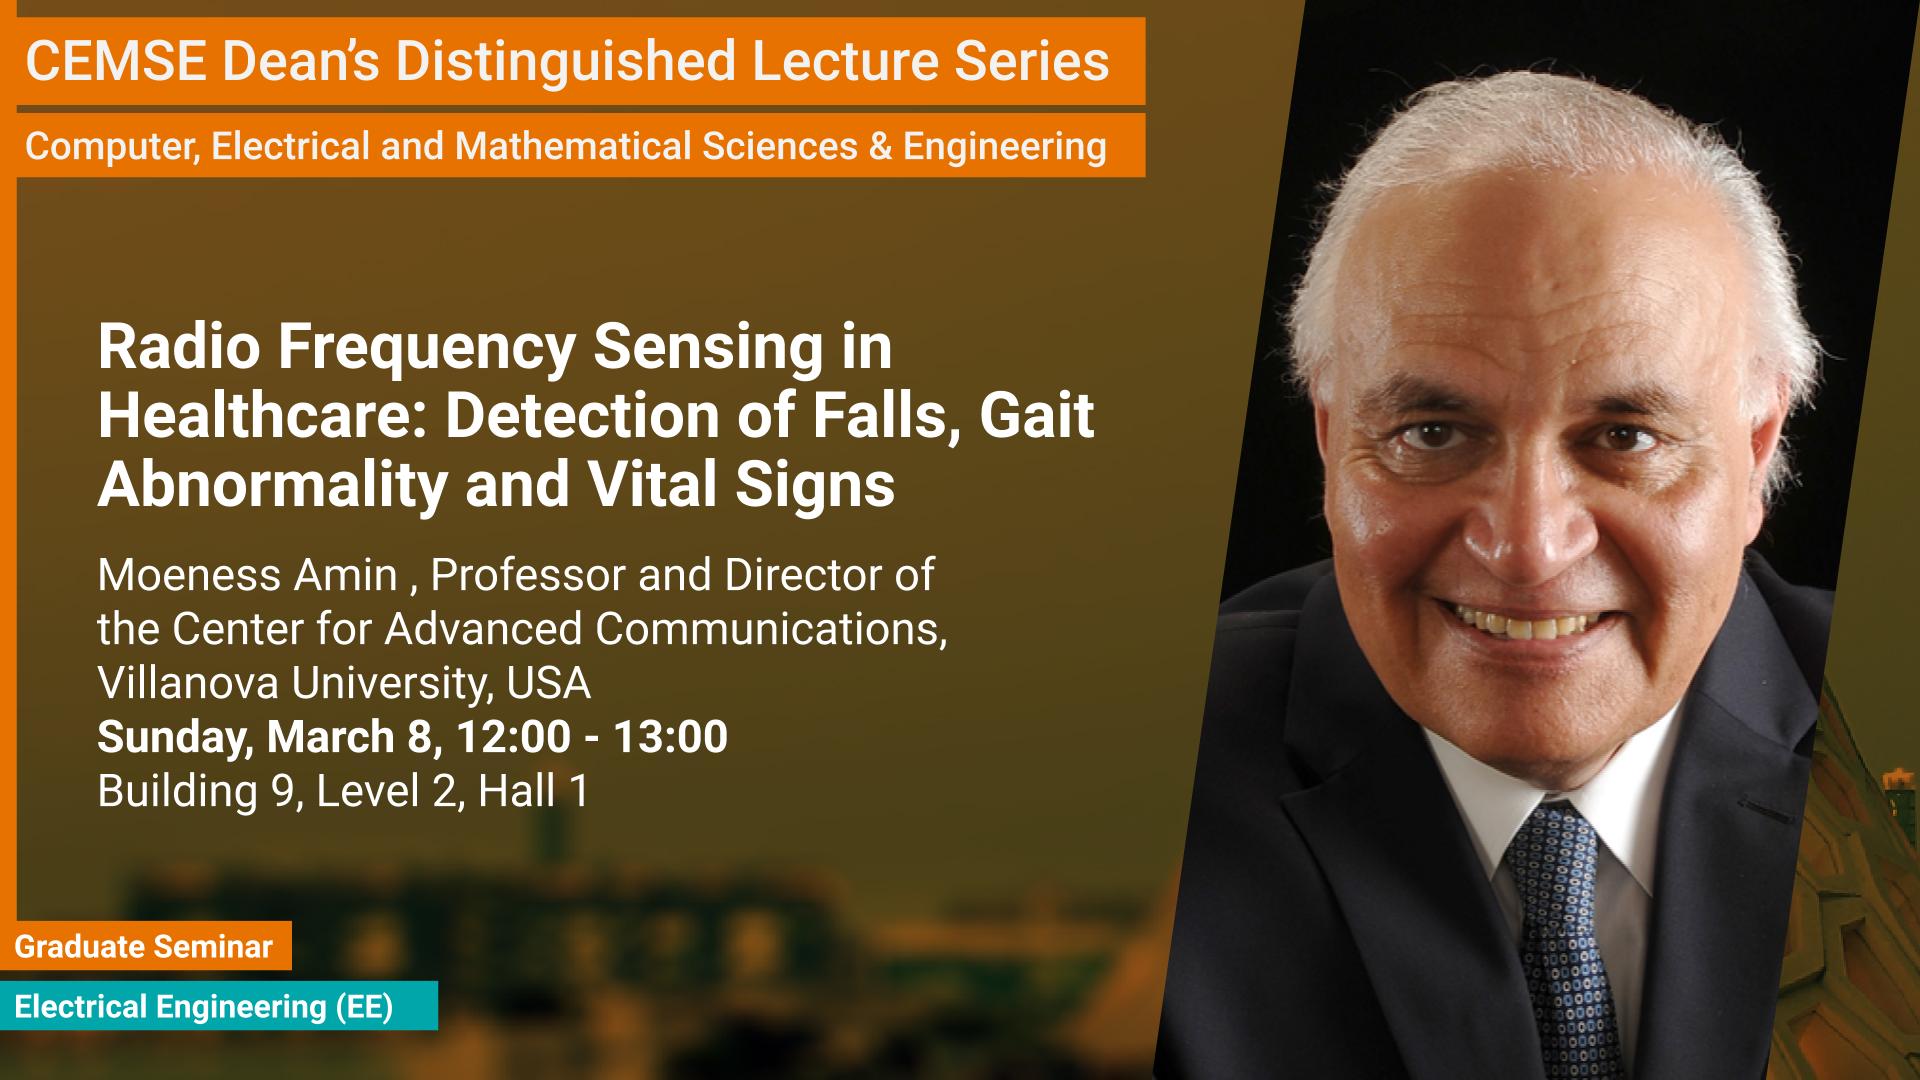 KAUST CEMSE Dean's Distinguished Lecture EE Graduate Seminar Moeness Amin Radio Frequency Sensing in Healthcare: Detection of Falls, Gait Abnormality and Vital Signs